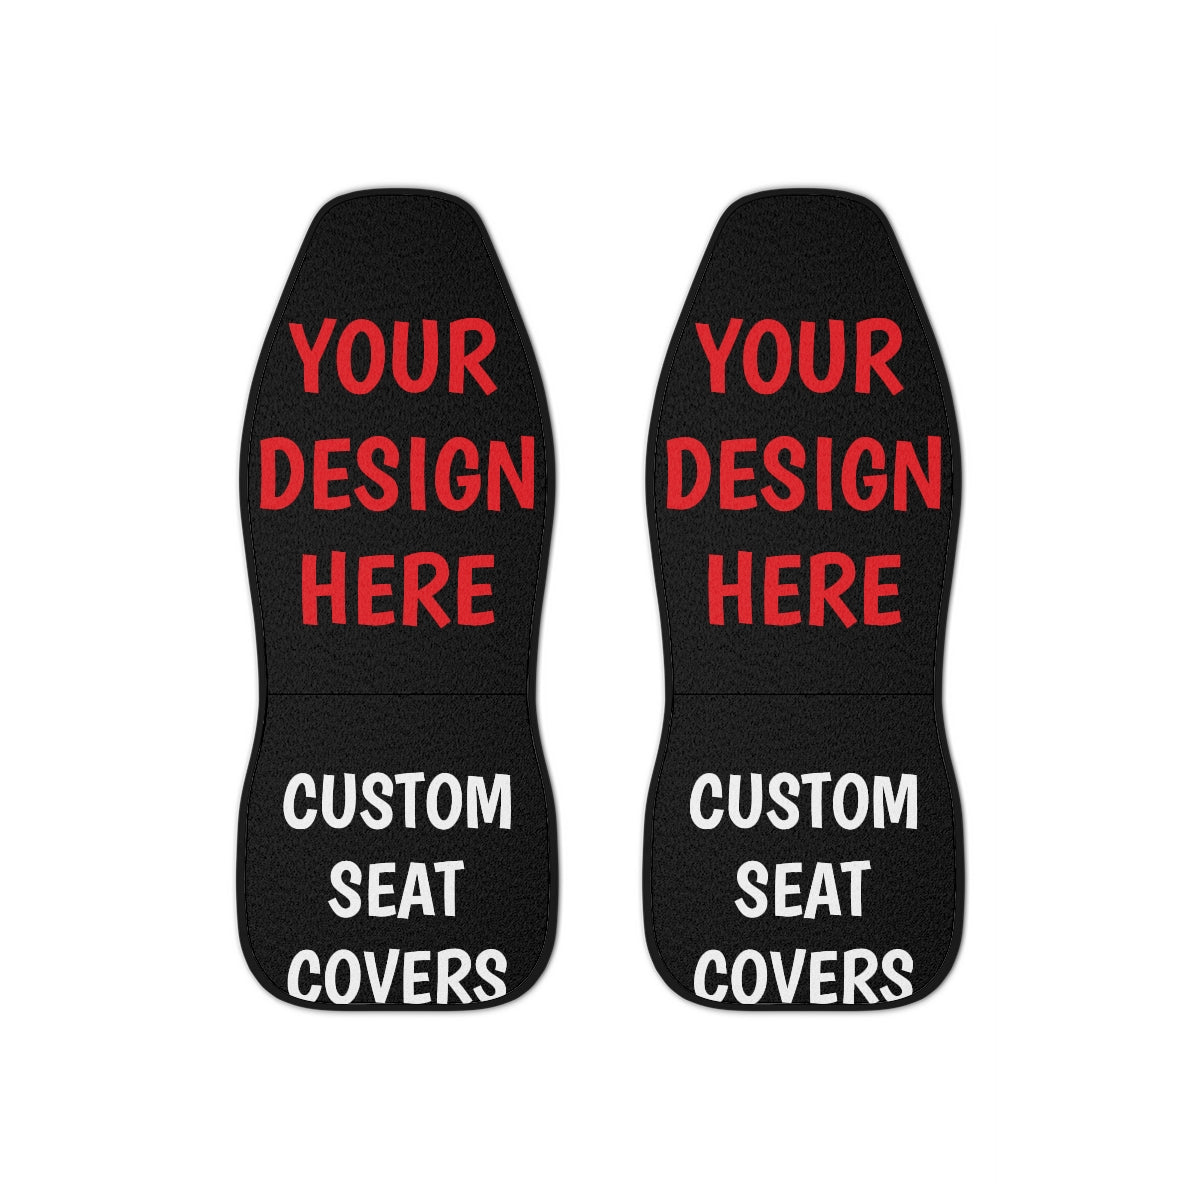 Custom Car Seat Covers Personalized Vehicle Covers Car Accessories Promotional Products Auto Décor